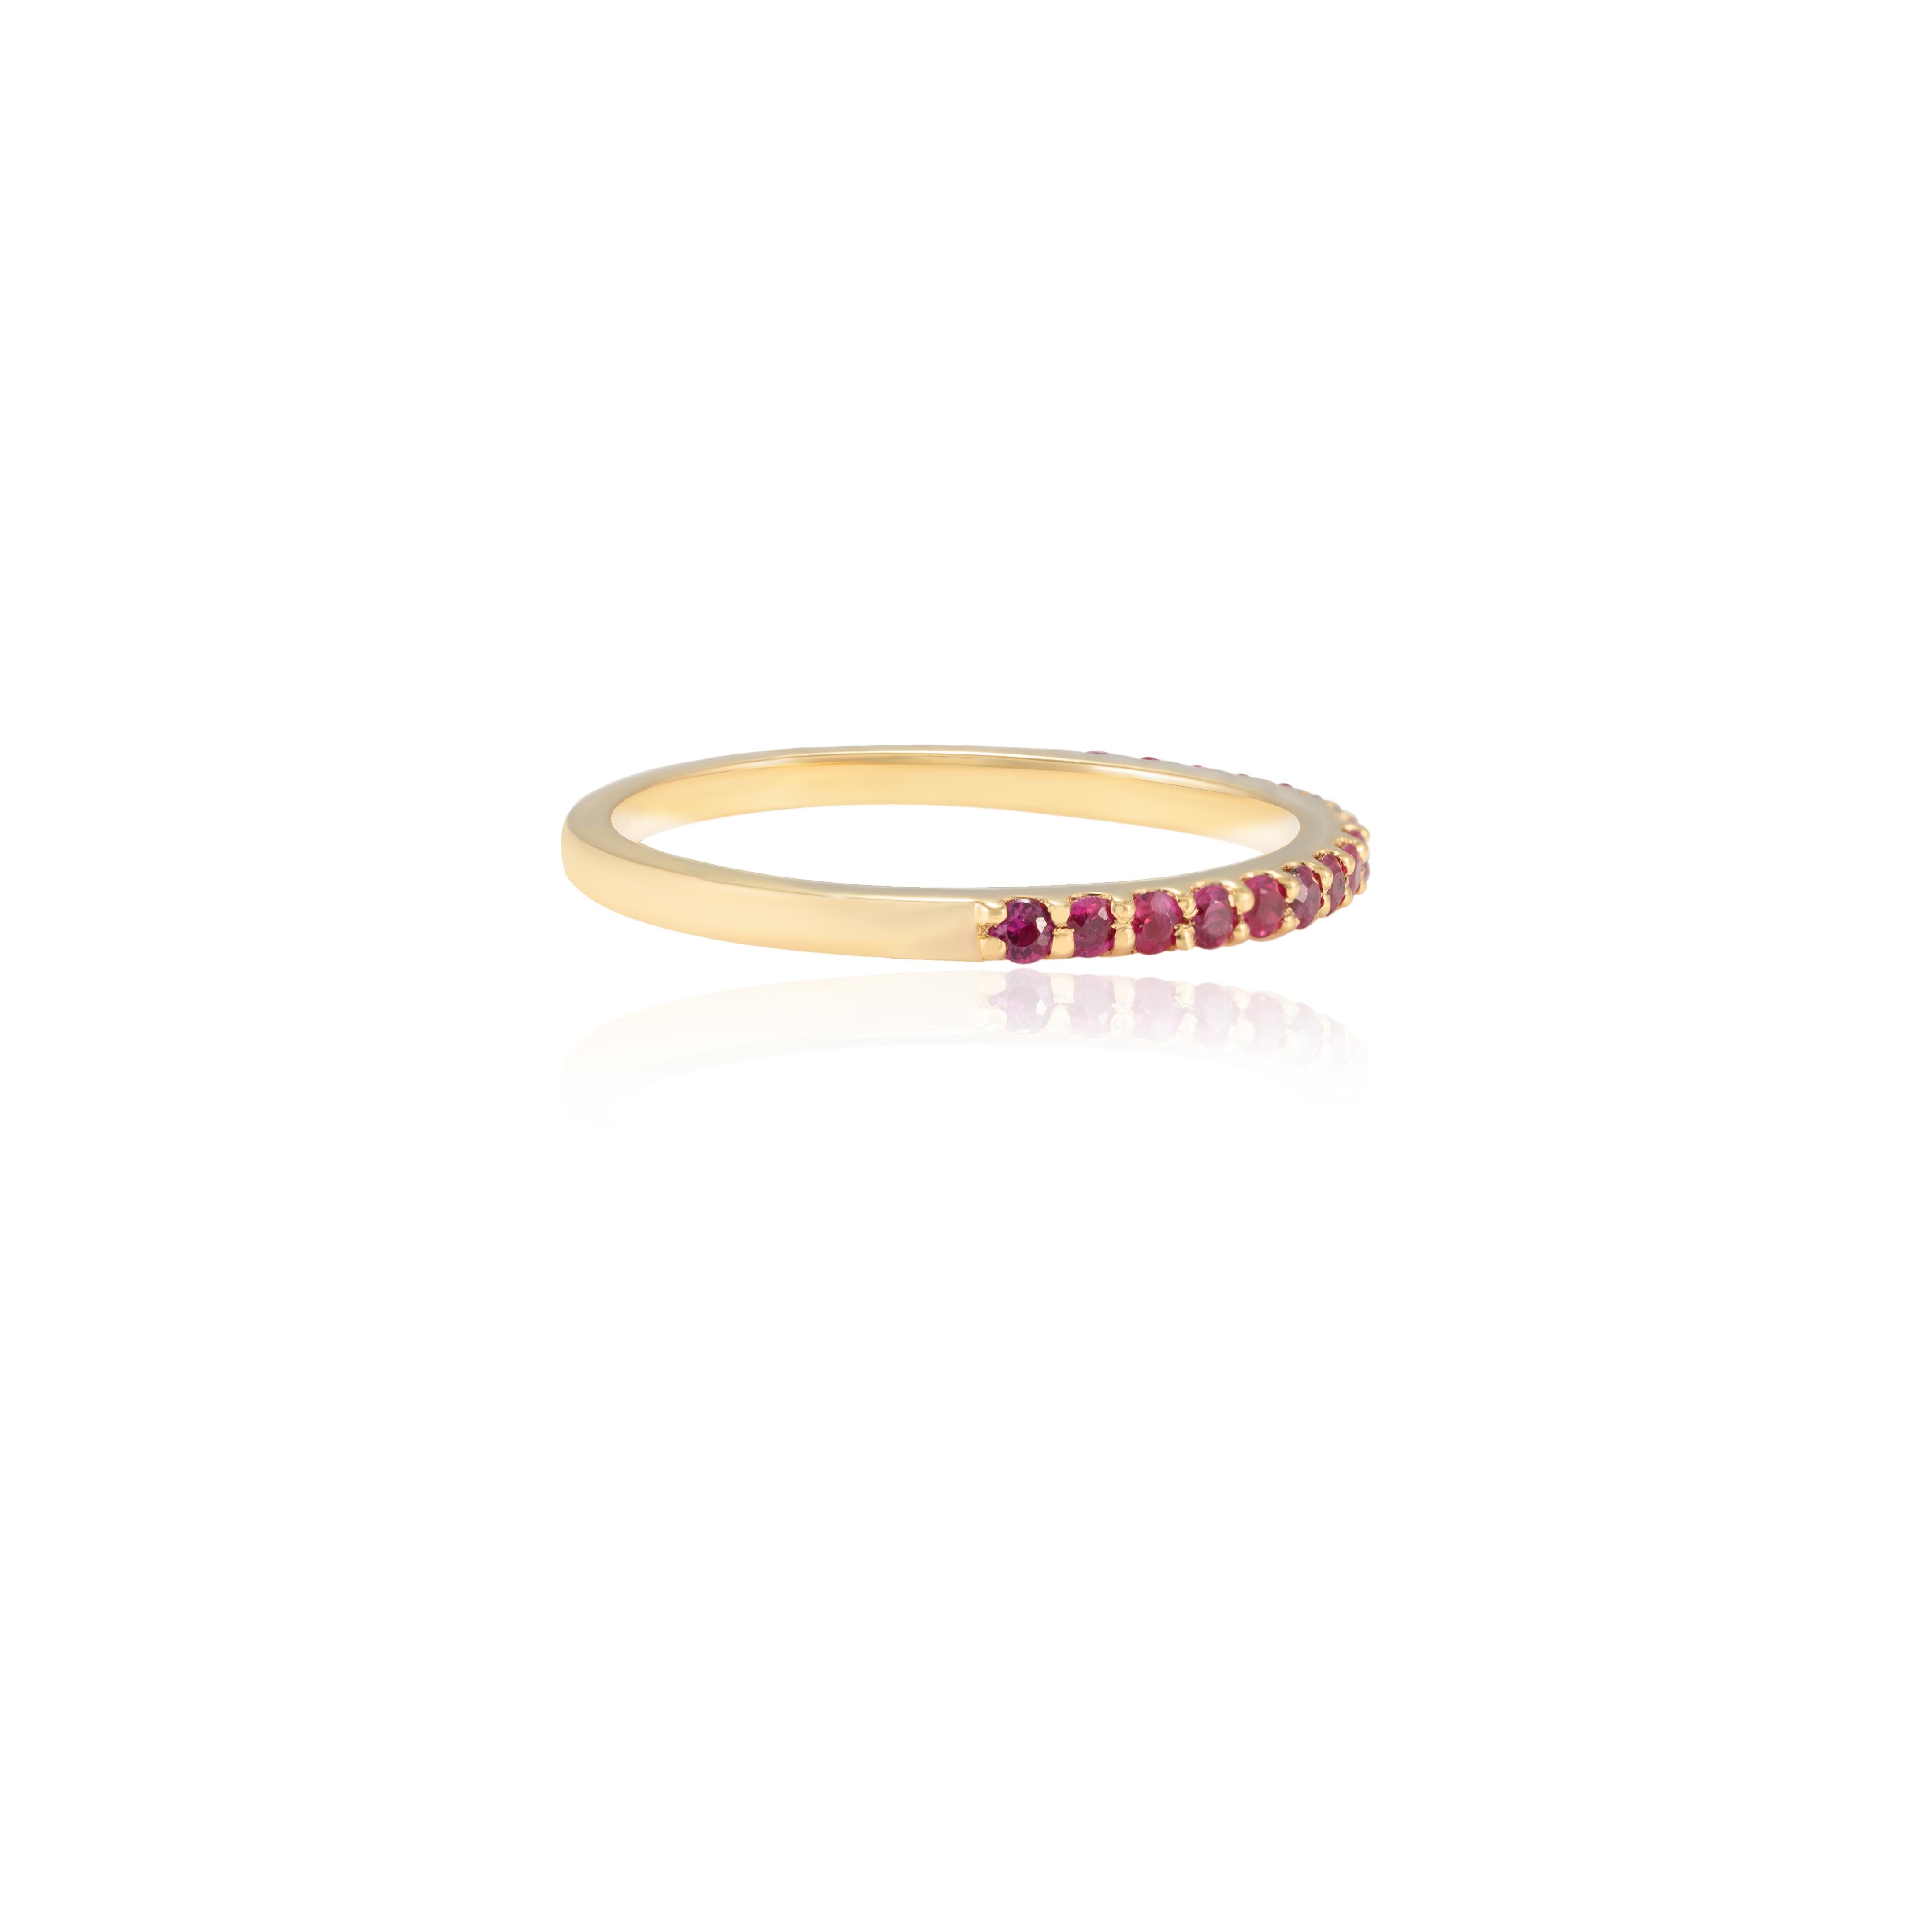 For Sale:  18k Solid Yellow Gold Stackable Round Cut Pave Ruby Gemstone Half Eternity Band 6